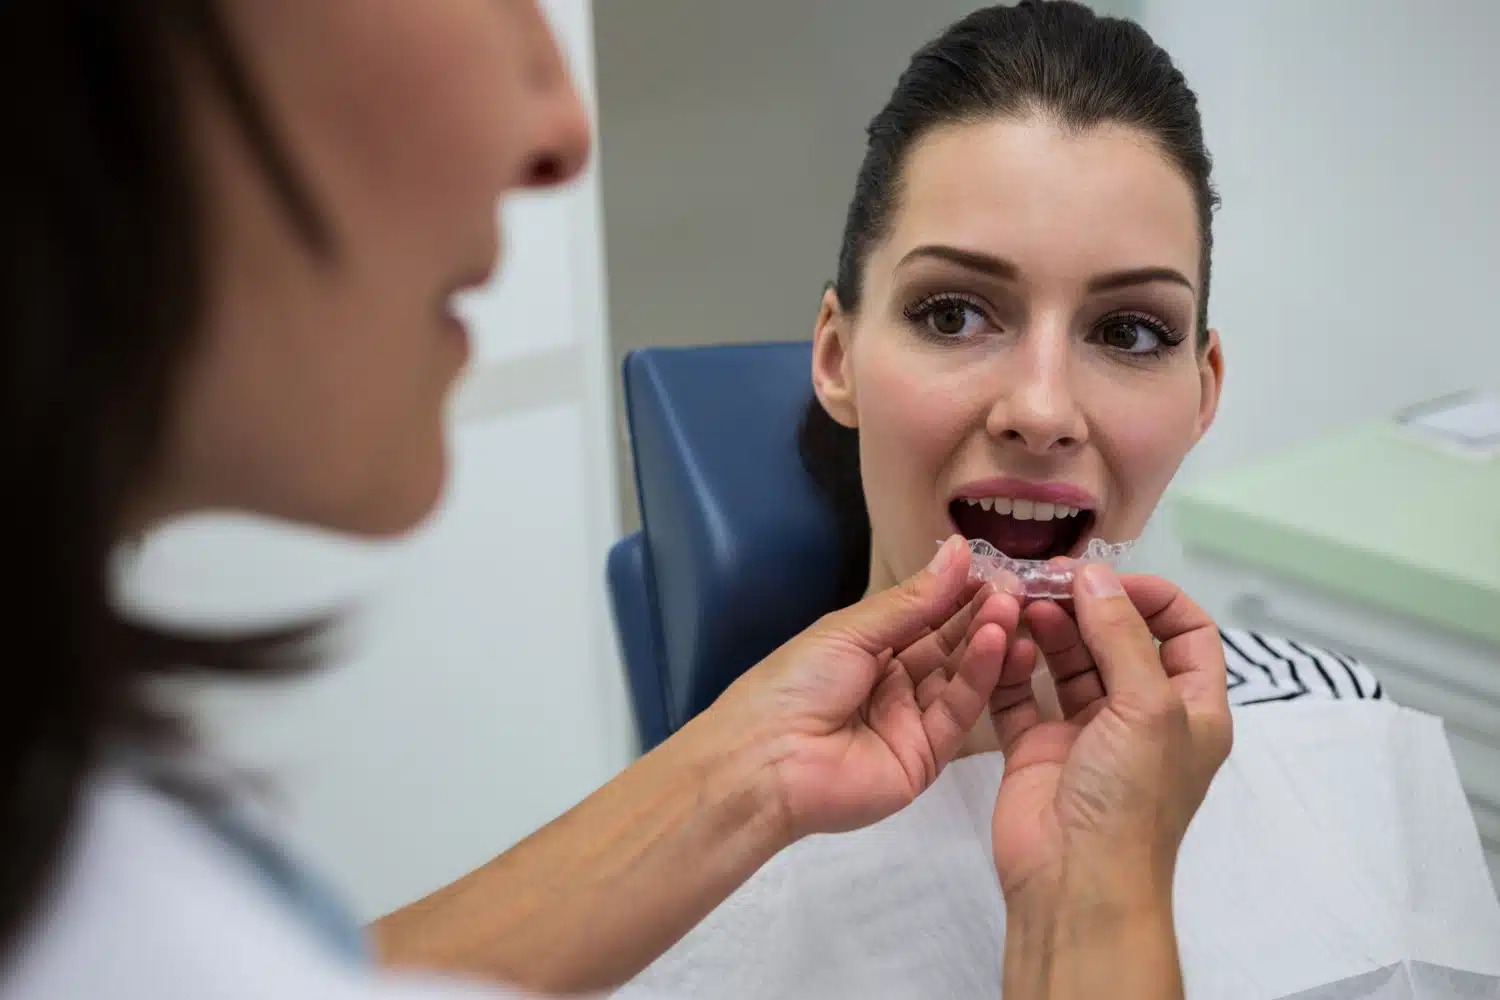 What Insurance Covers Invisalign For Adults